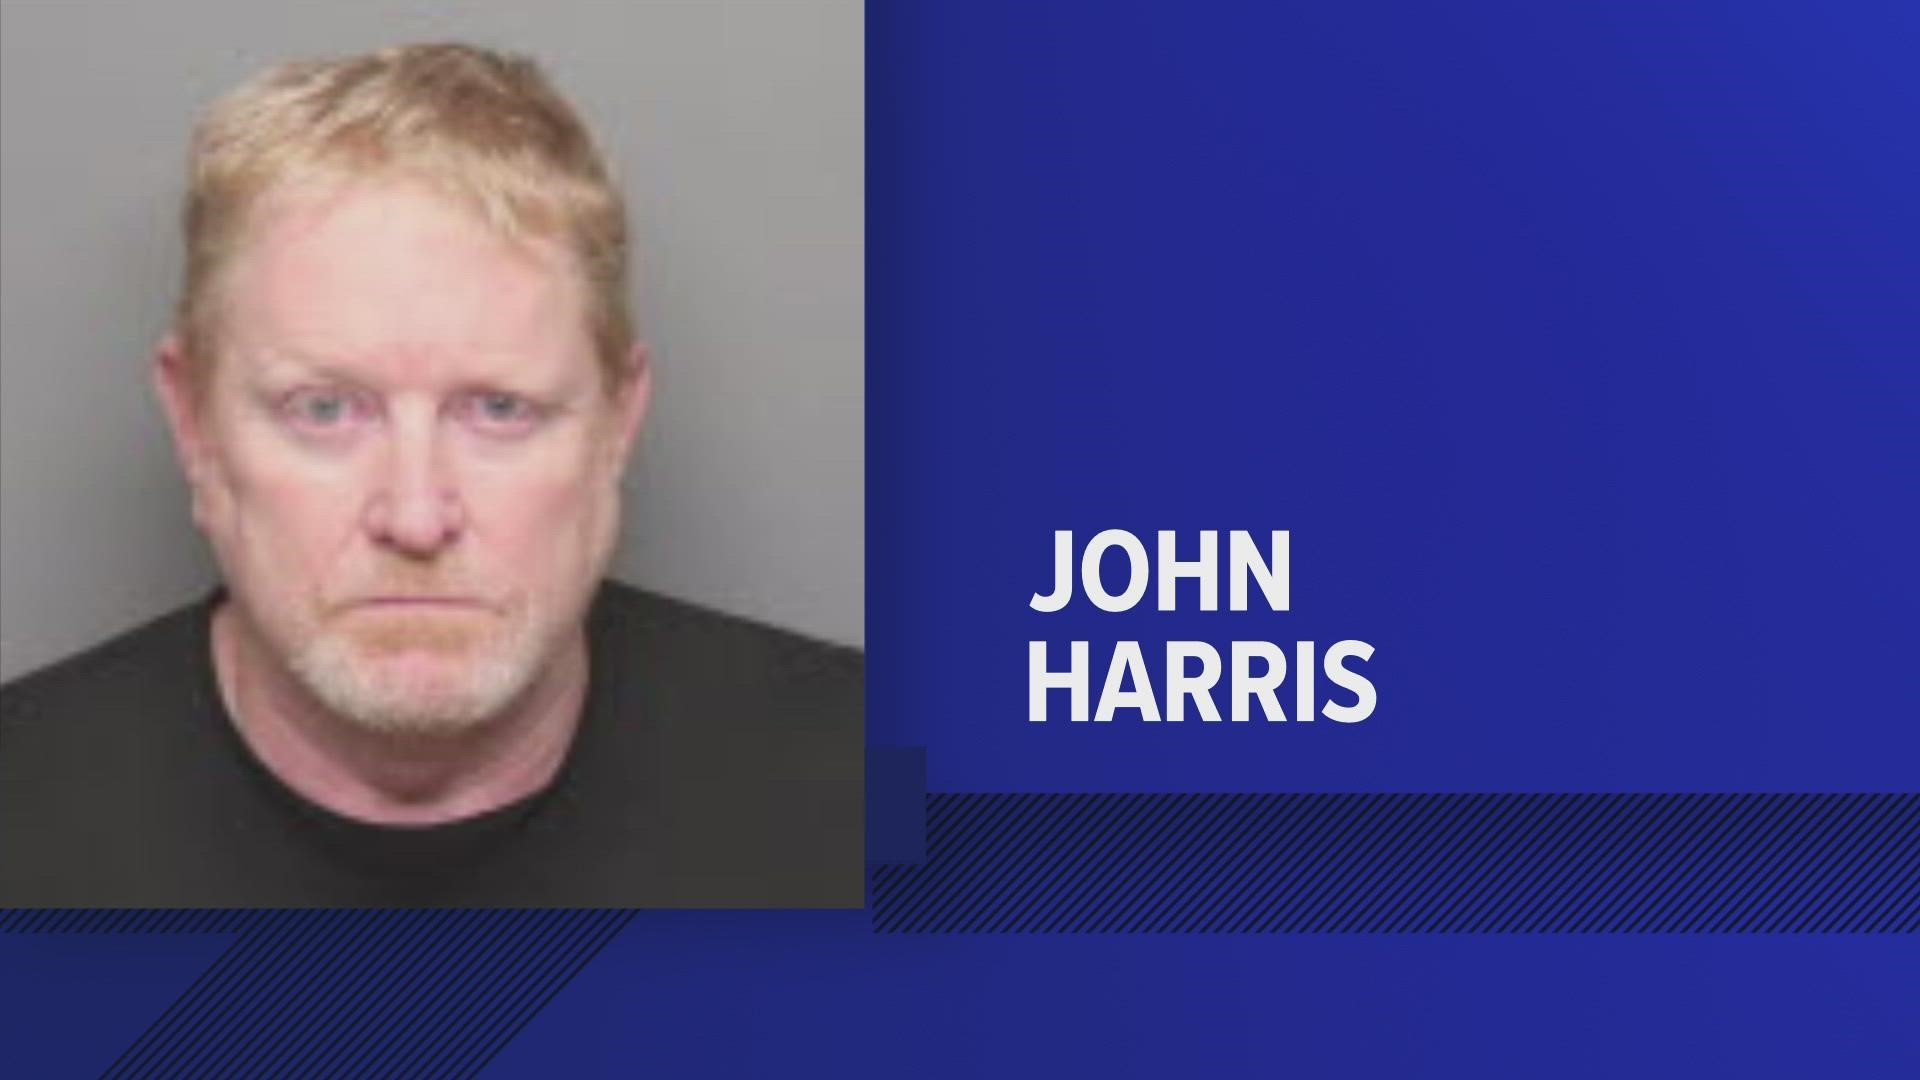 The Tennessee Department of Revenue said John Harris, former owner of the Double J Smokehouse in downtown Memphis, stole more than $60,000 in sales tax.